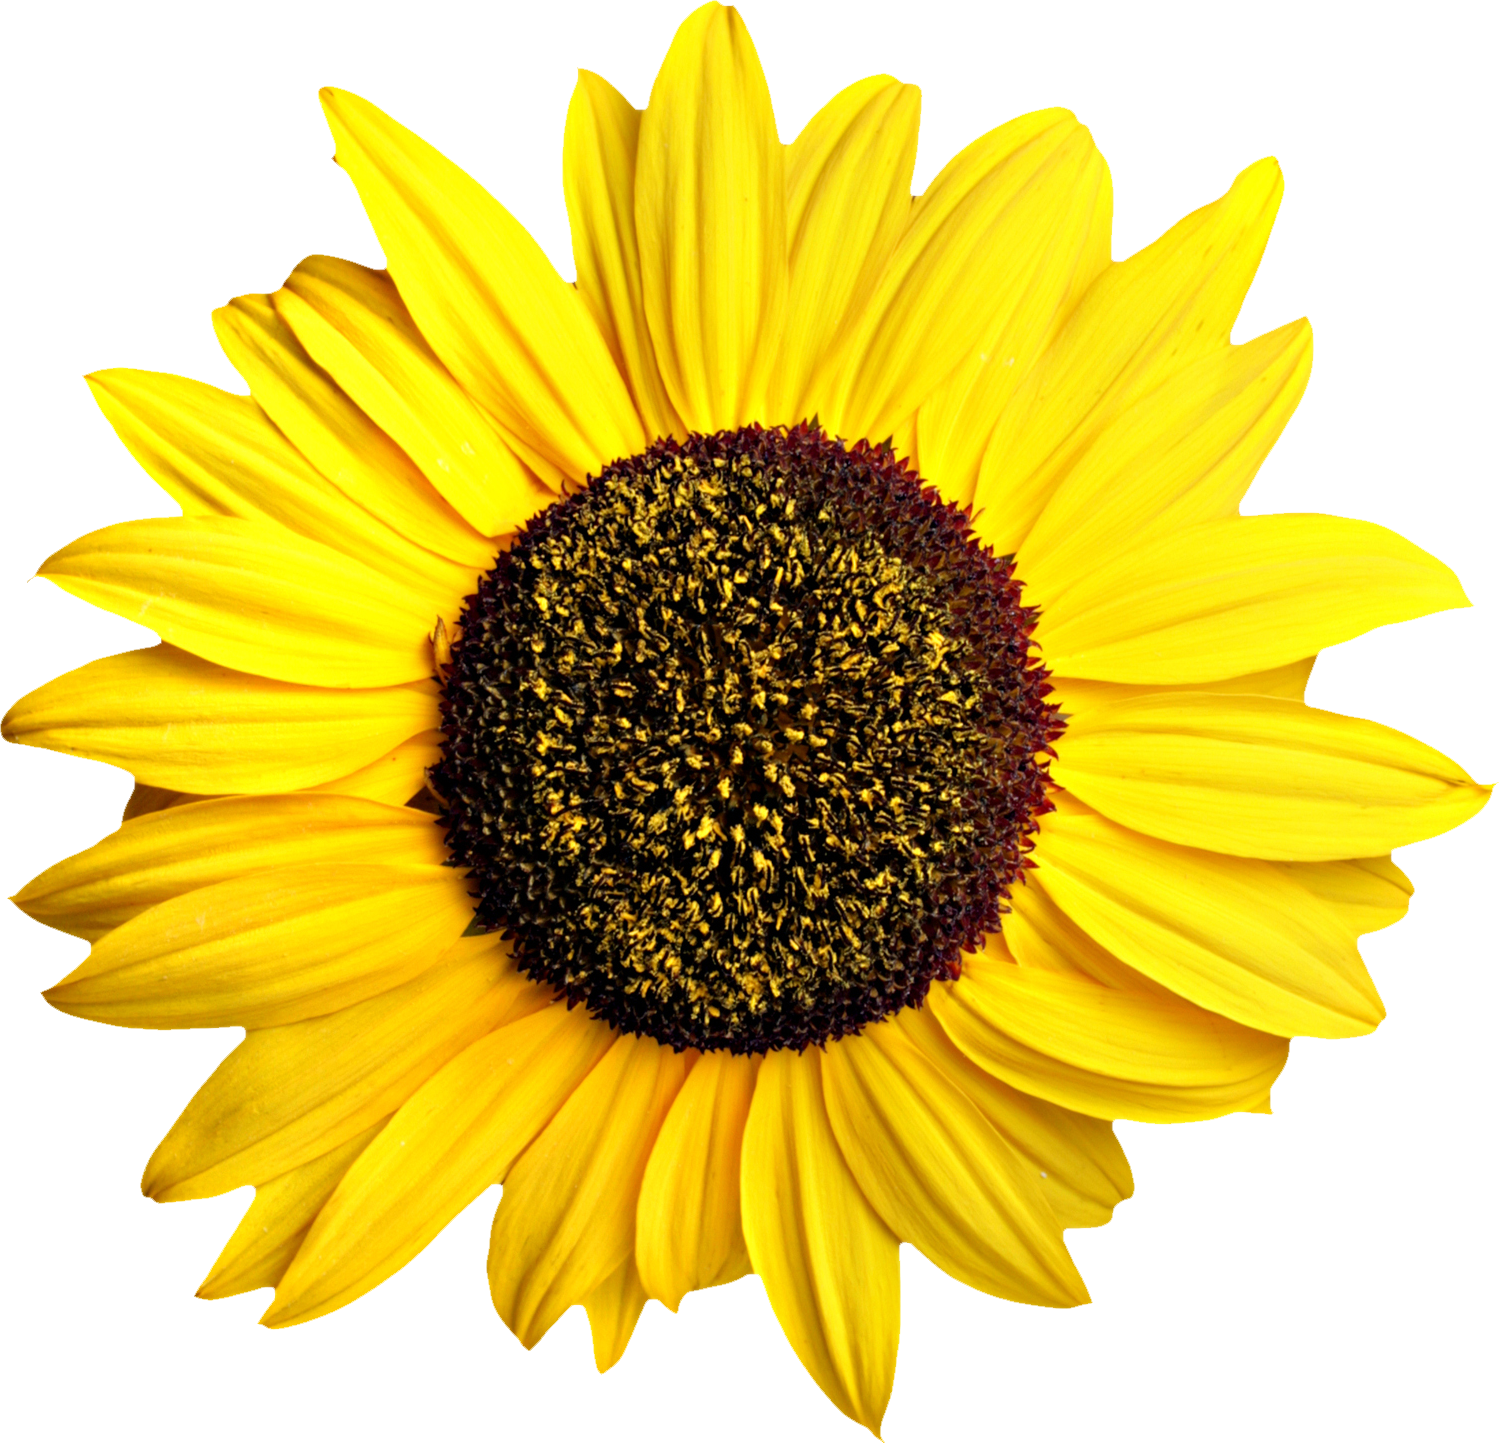 Icon png web icons. November clipart sunflower